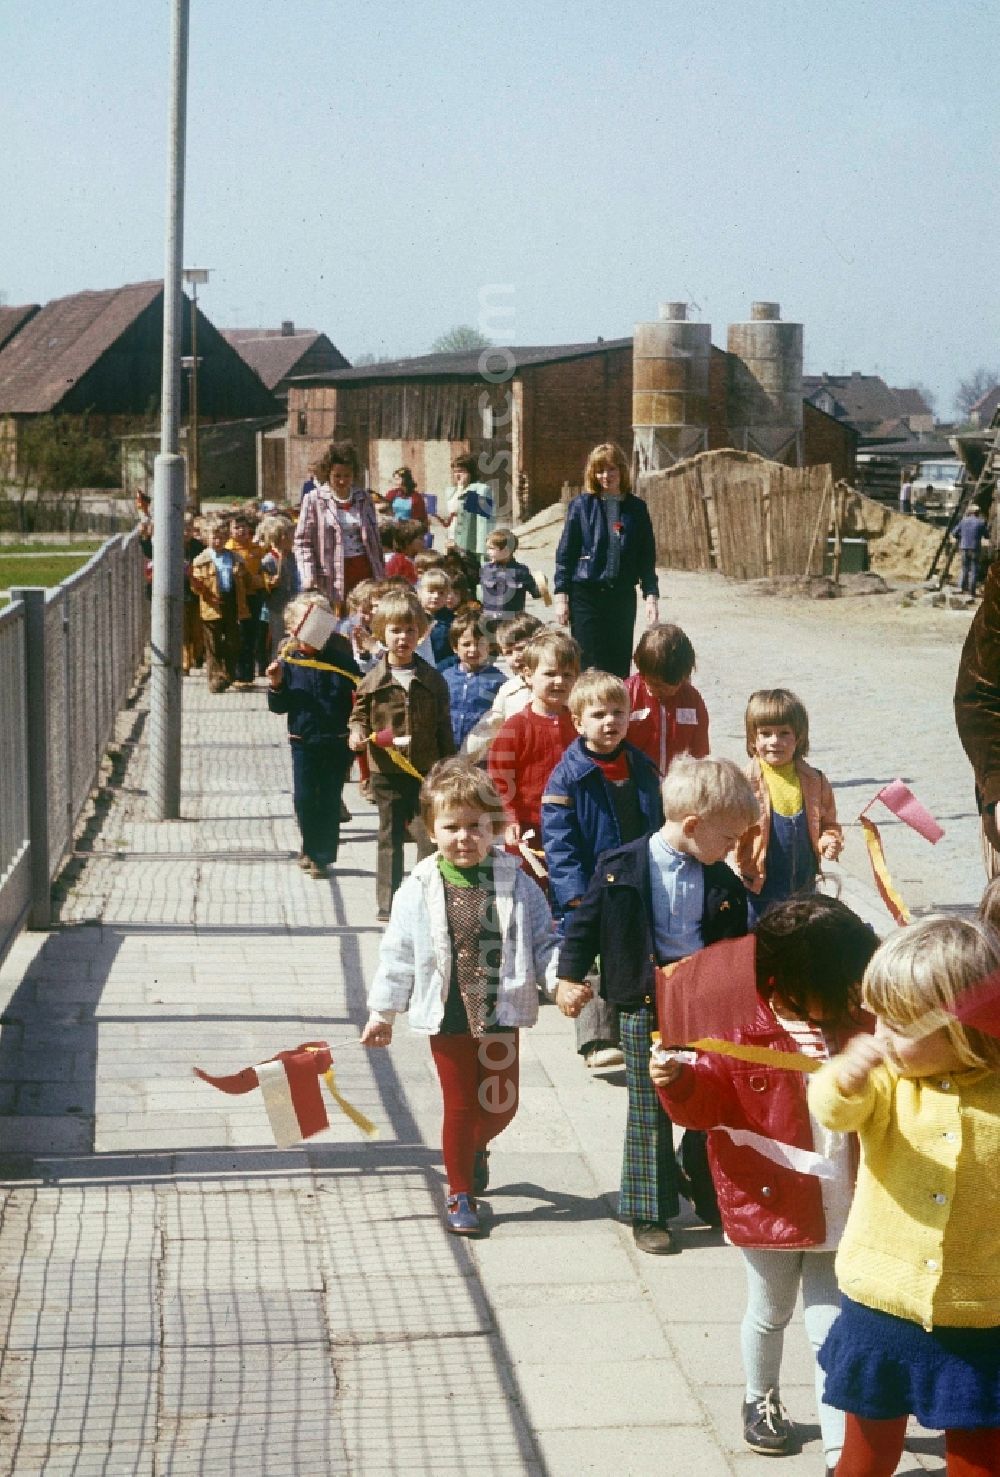 GDR image archive: Neustrelitz - A nursery school group, with balloons and flags, on the way to May 1 demonstration in Neustrelitz in Mecklenburg-Vorpommern in the territory of the former GDR, German Democratic Republic